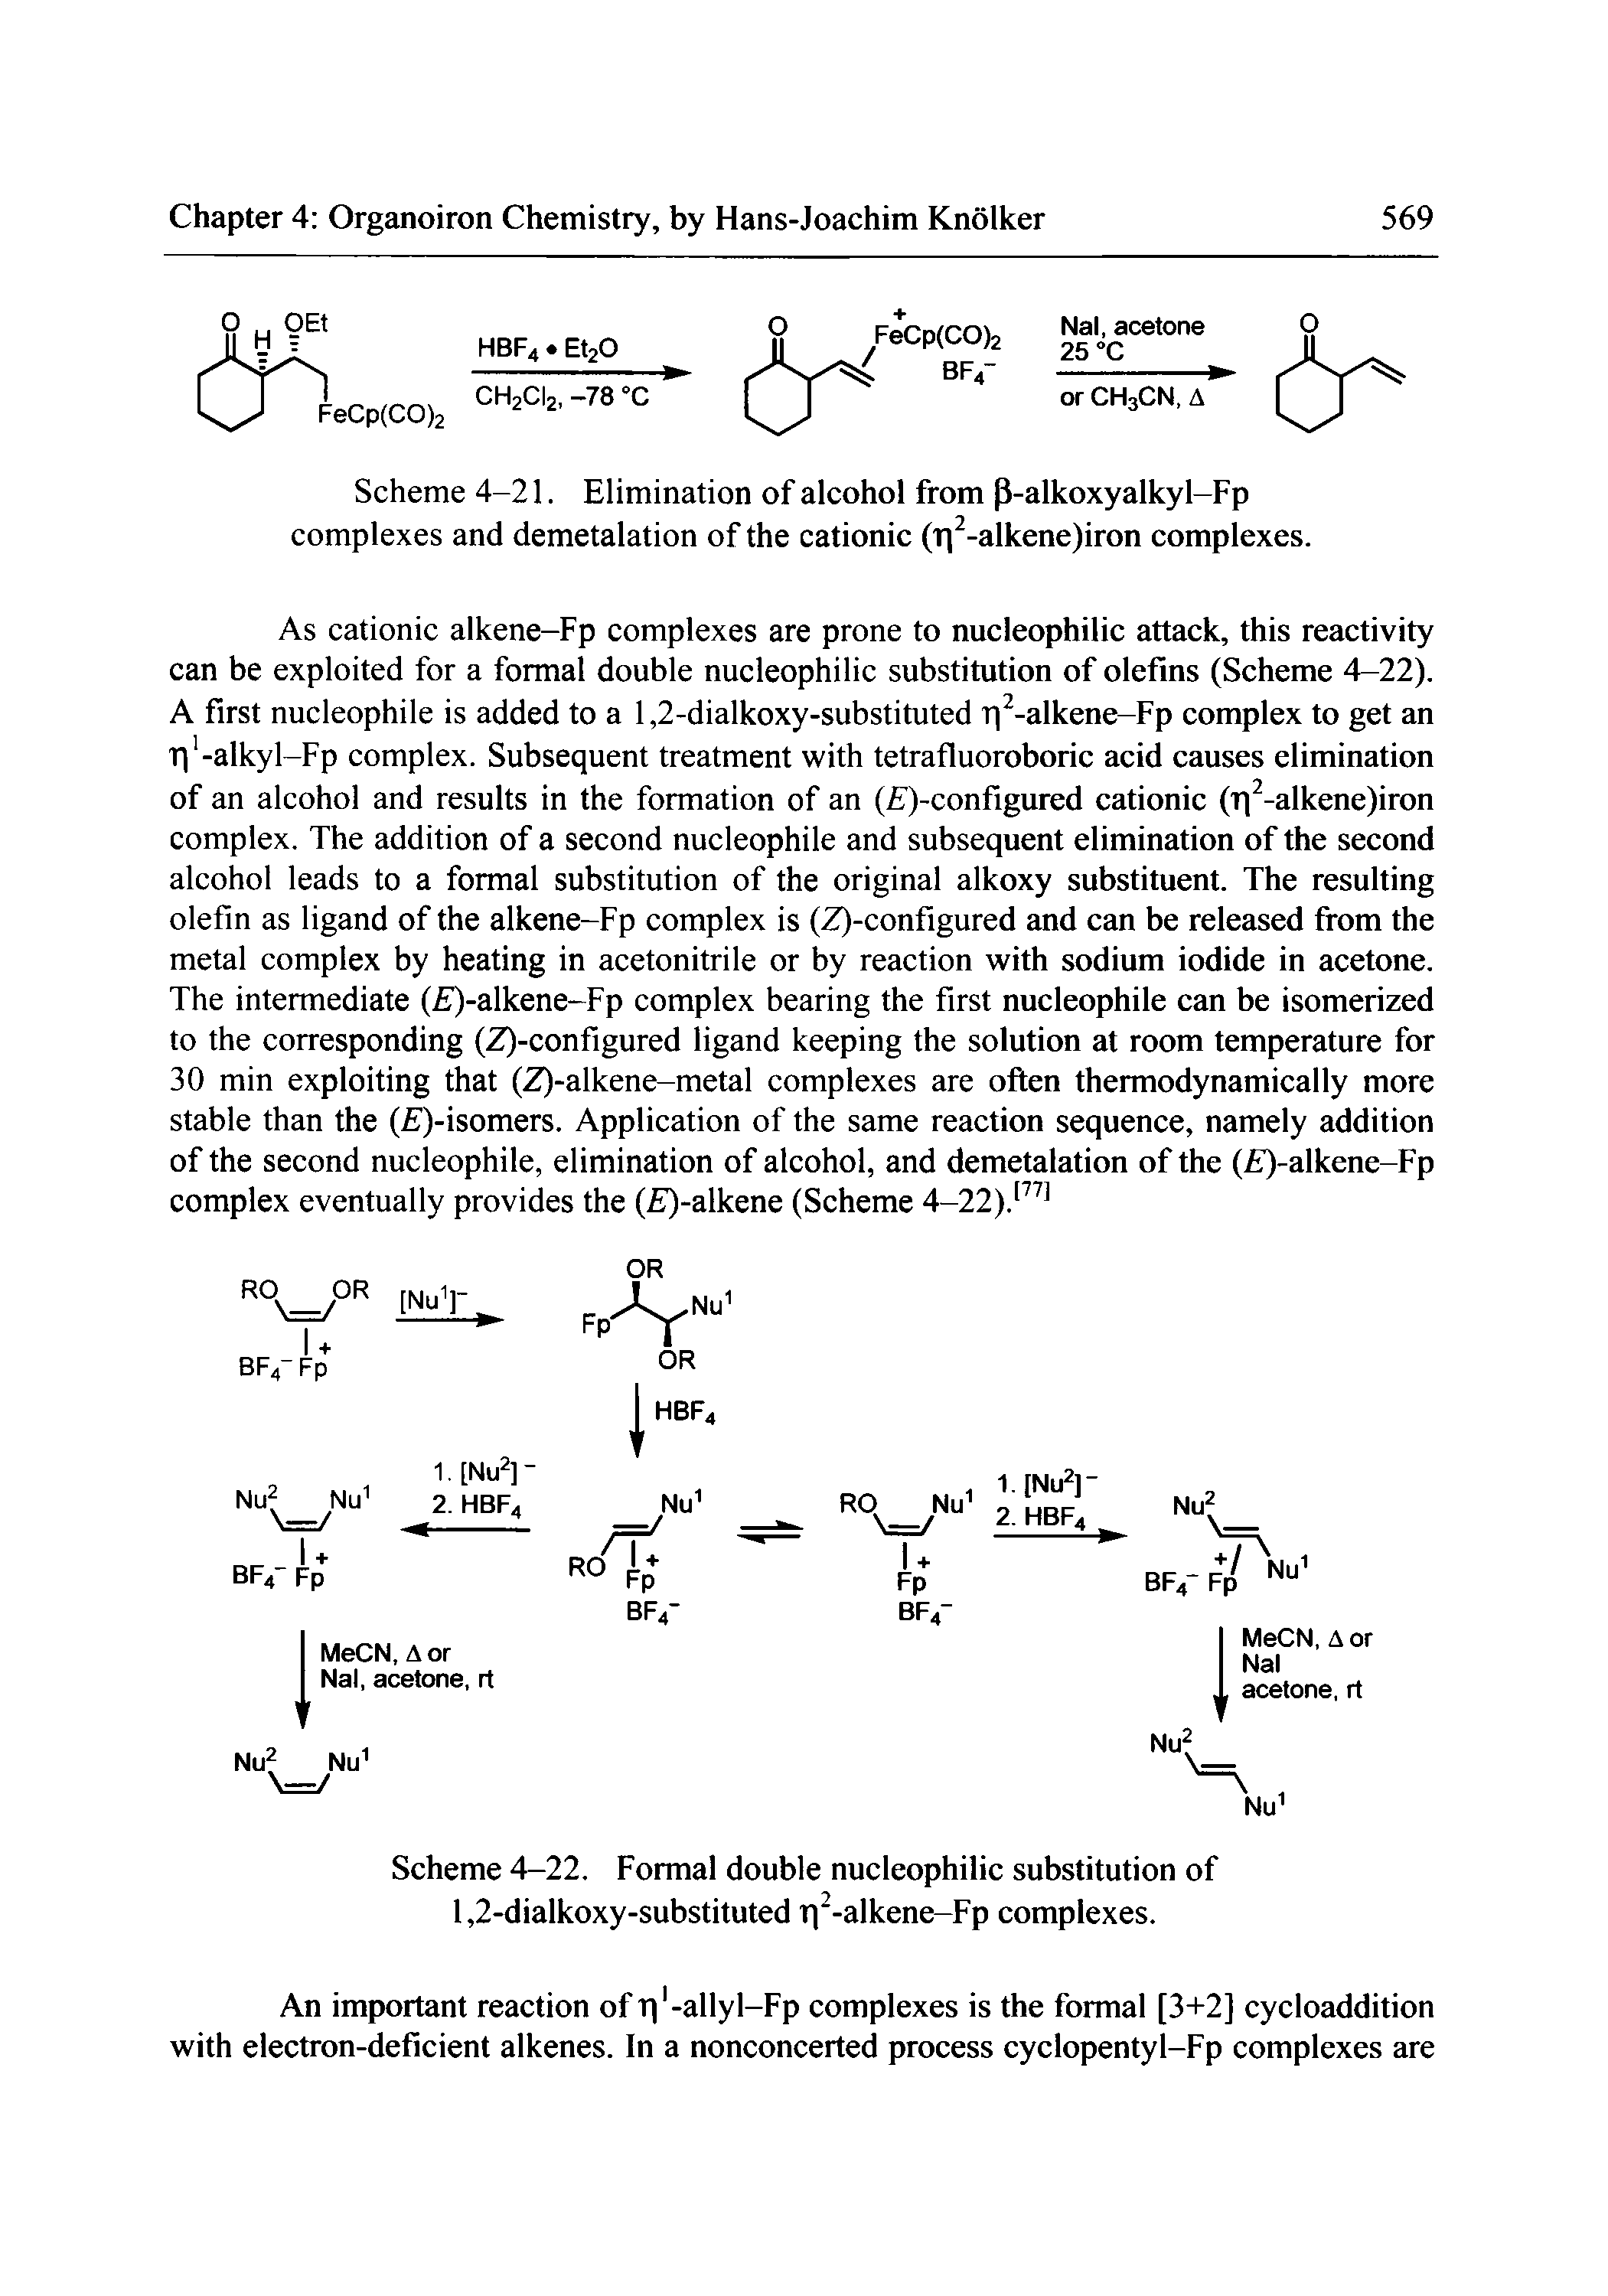 Scheme 4-21. Elimination of alcohol from P-alkoxyalkyl-Fp complexes and demetalation of the cationic (Ti -alkene)iron complexes.